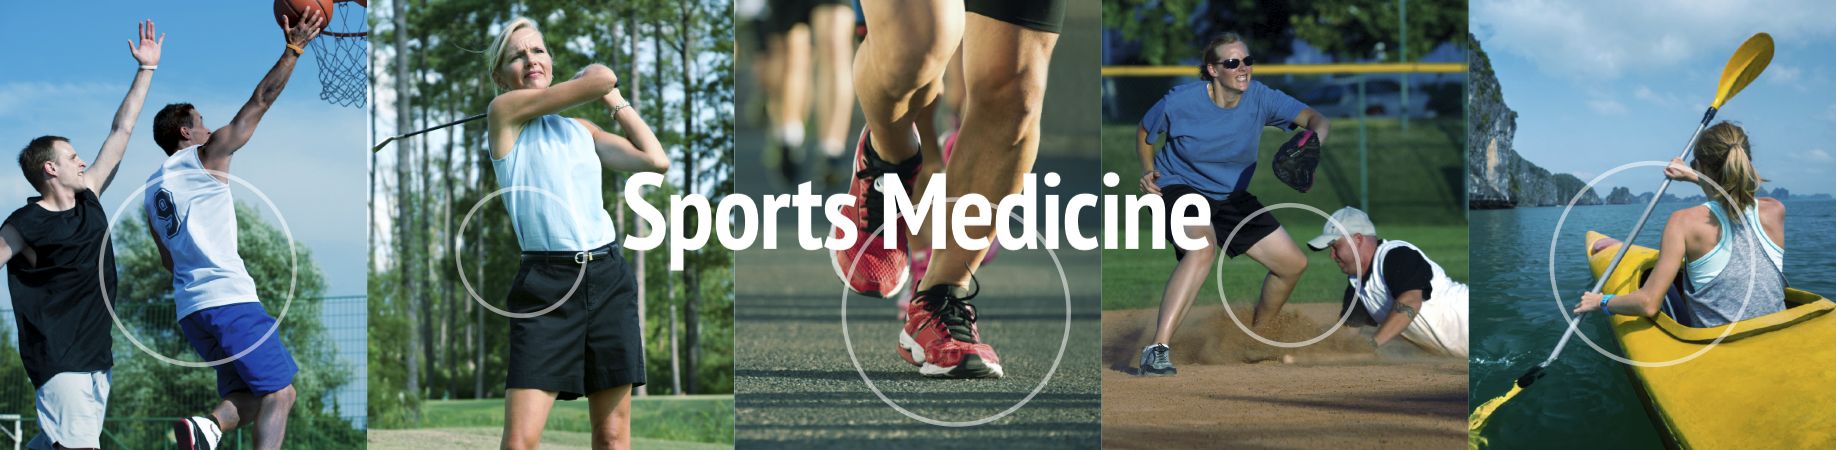 Our experienced Sports Medicine team will work together with you to get you safely back in the game. Contact Orthopaedic Associates of Muskegon today!